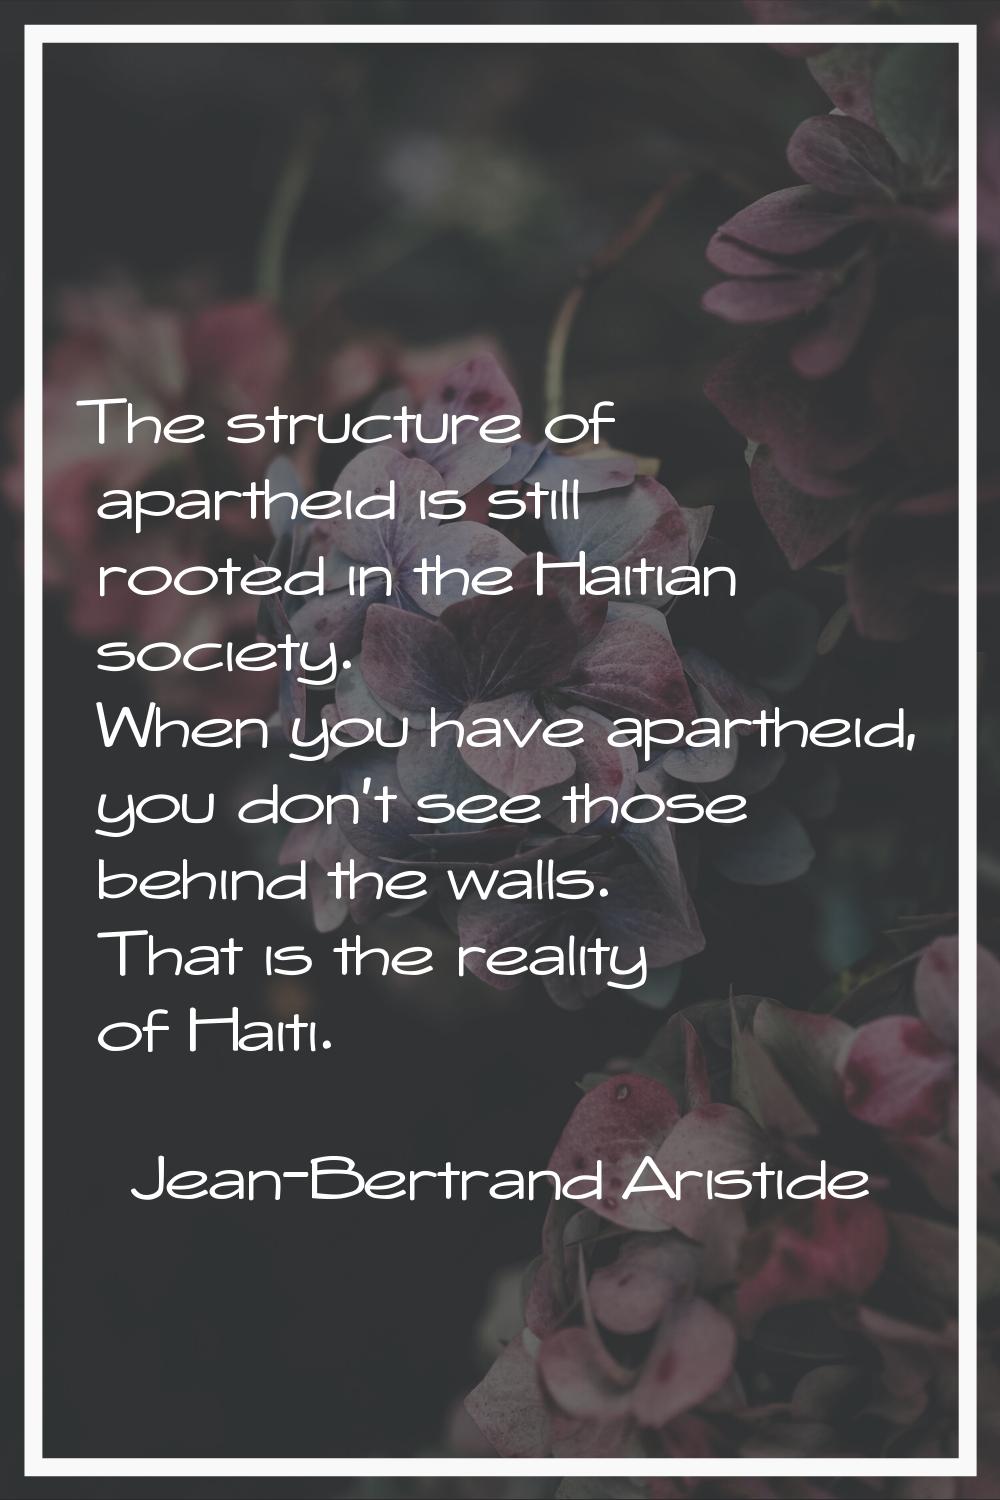 The structure of apartheid is still rooted in the Haitian society. When you have apartheid, you don